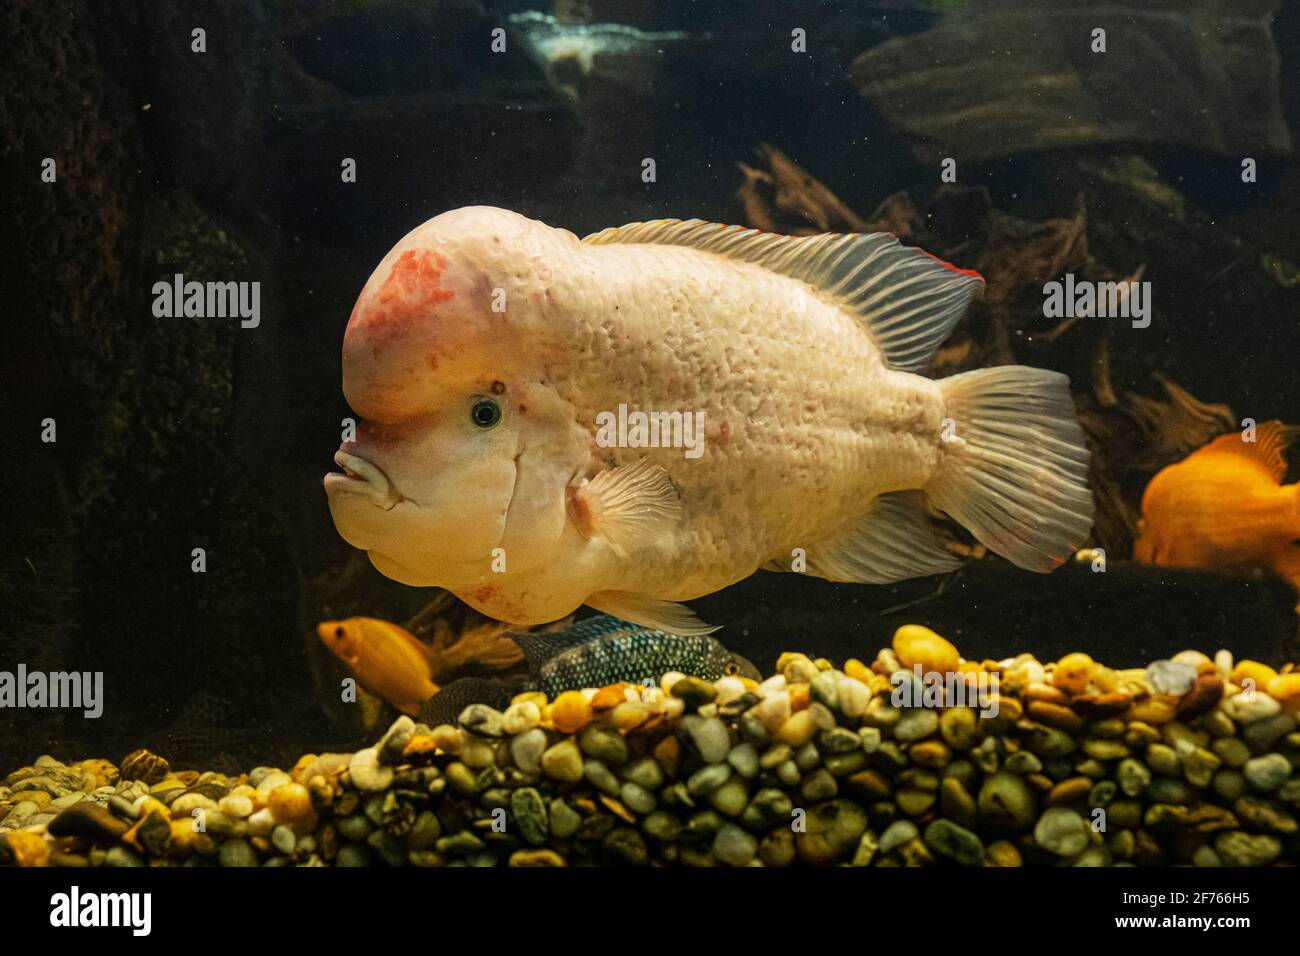 Amphilophus citrinellus, large cichlid fish endemic to the San Juan river and adjacent watersheds in Costa Rica and Nicaragua. Stock Photo